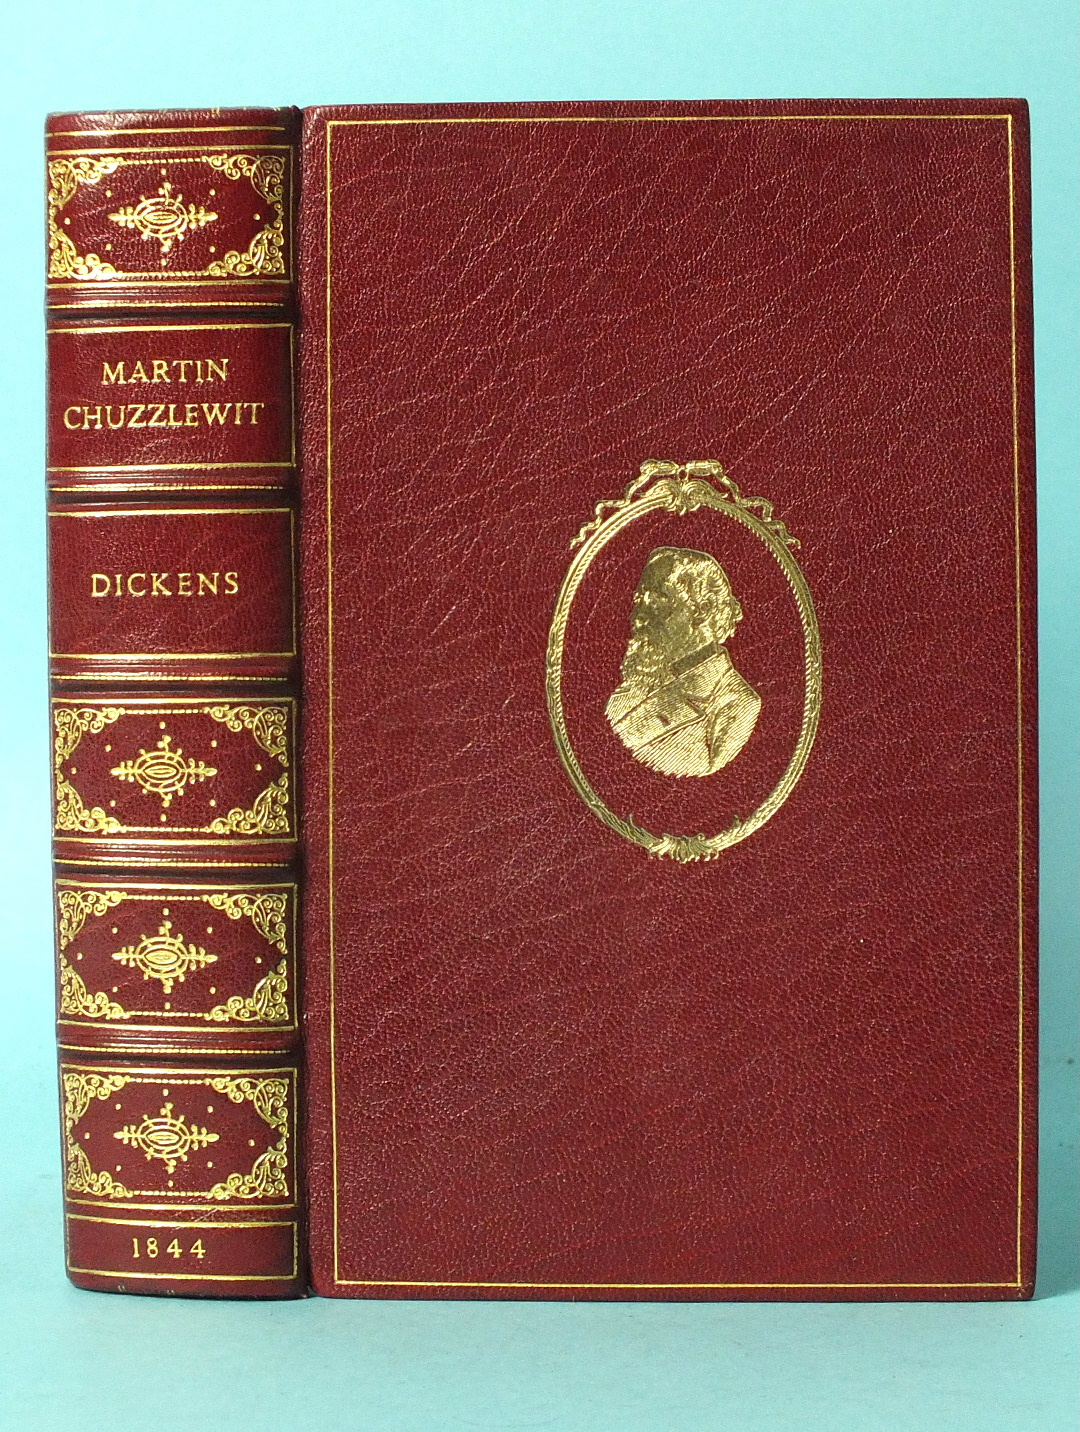 Dickens (Charles), The Life and Adventures of Martin Chuzzlewit, 1st Edition, 1st Issue, (with